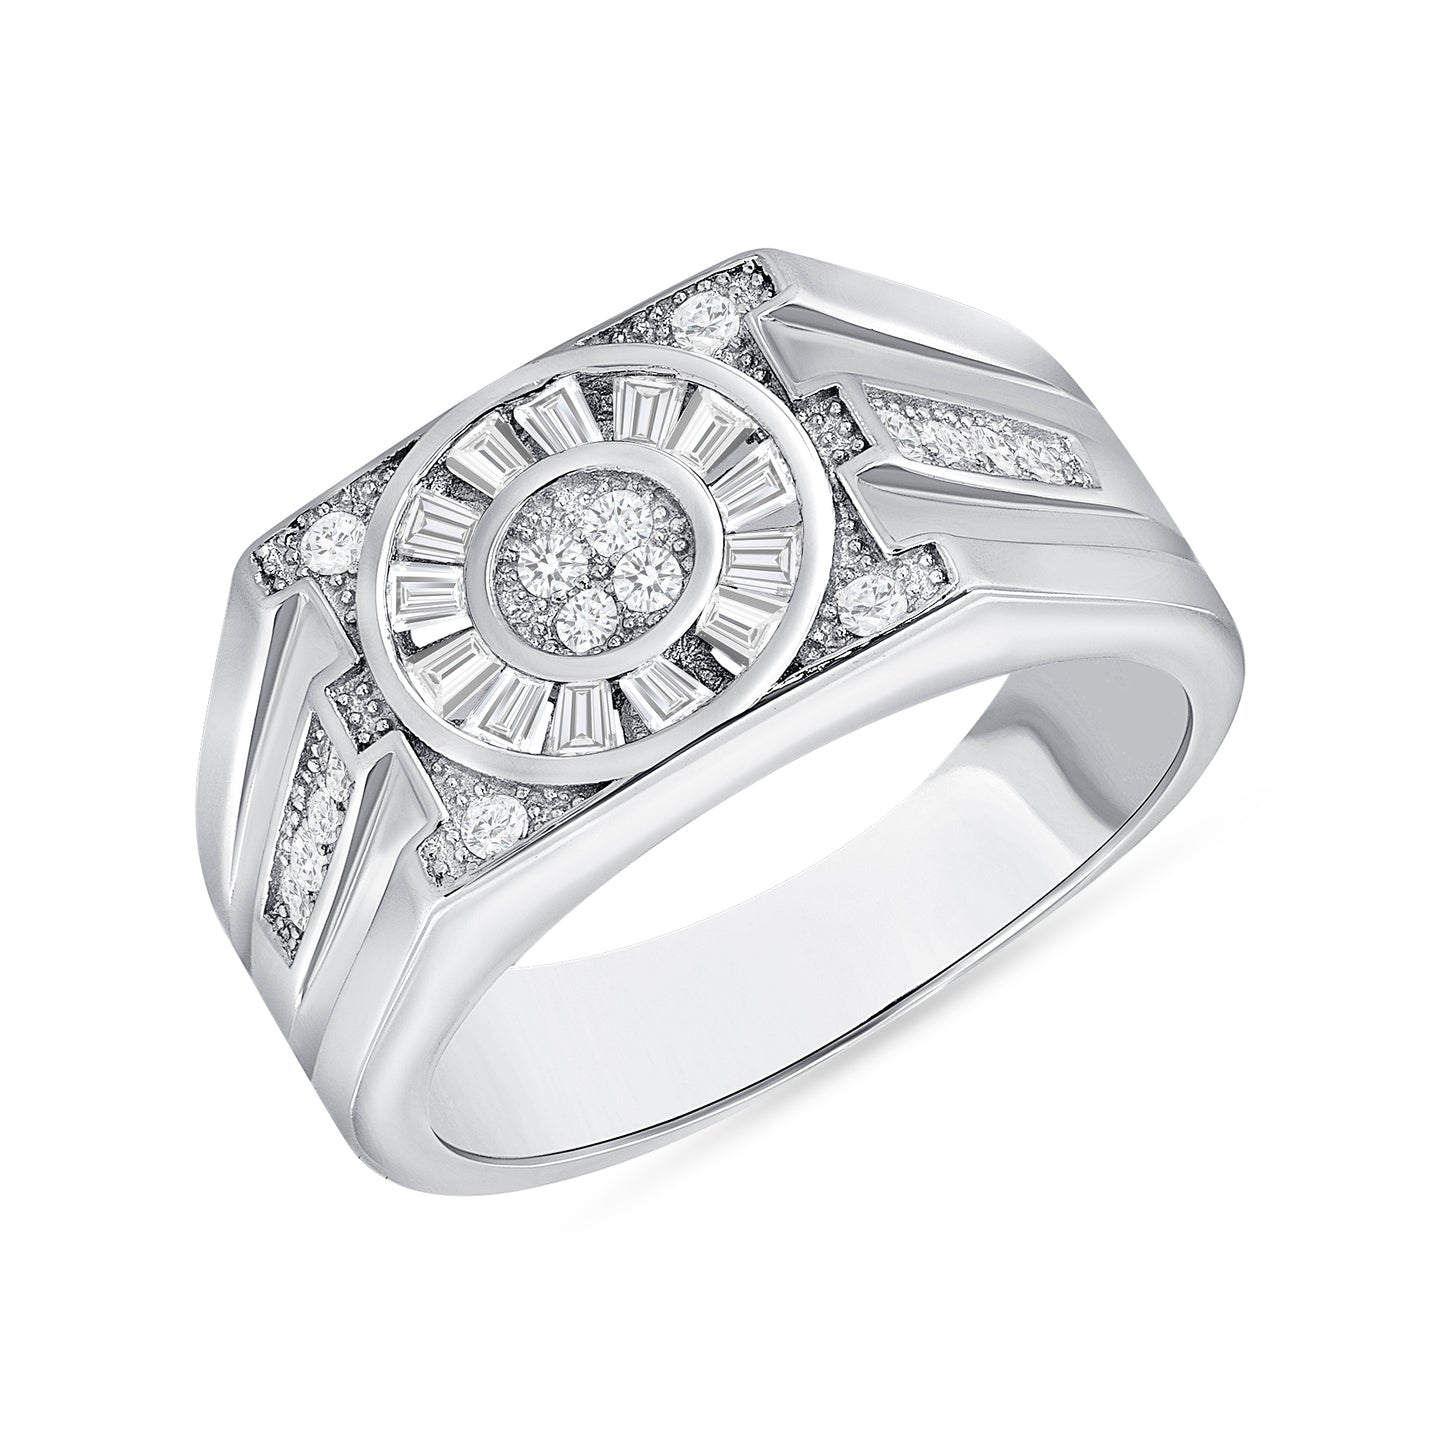 Silver 925 Rhodium Plated Round Cubic Zirconia w/ Baguette Men's Ring. LF512-641Z